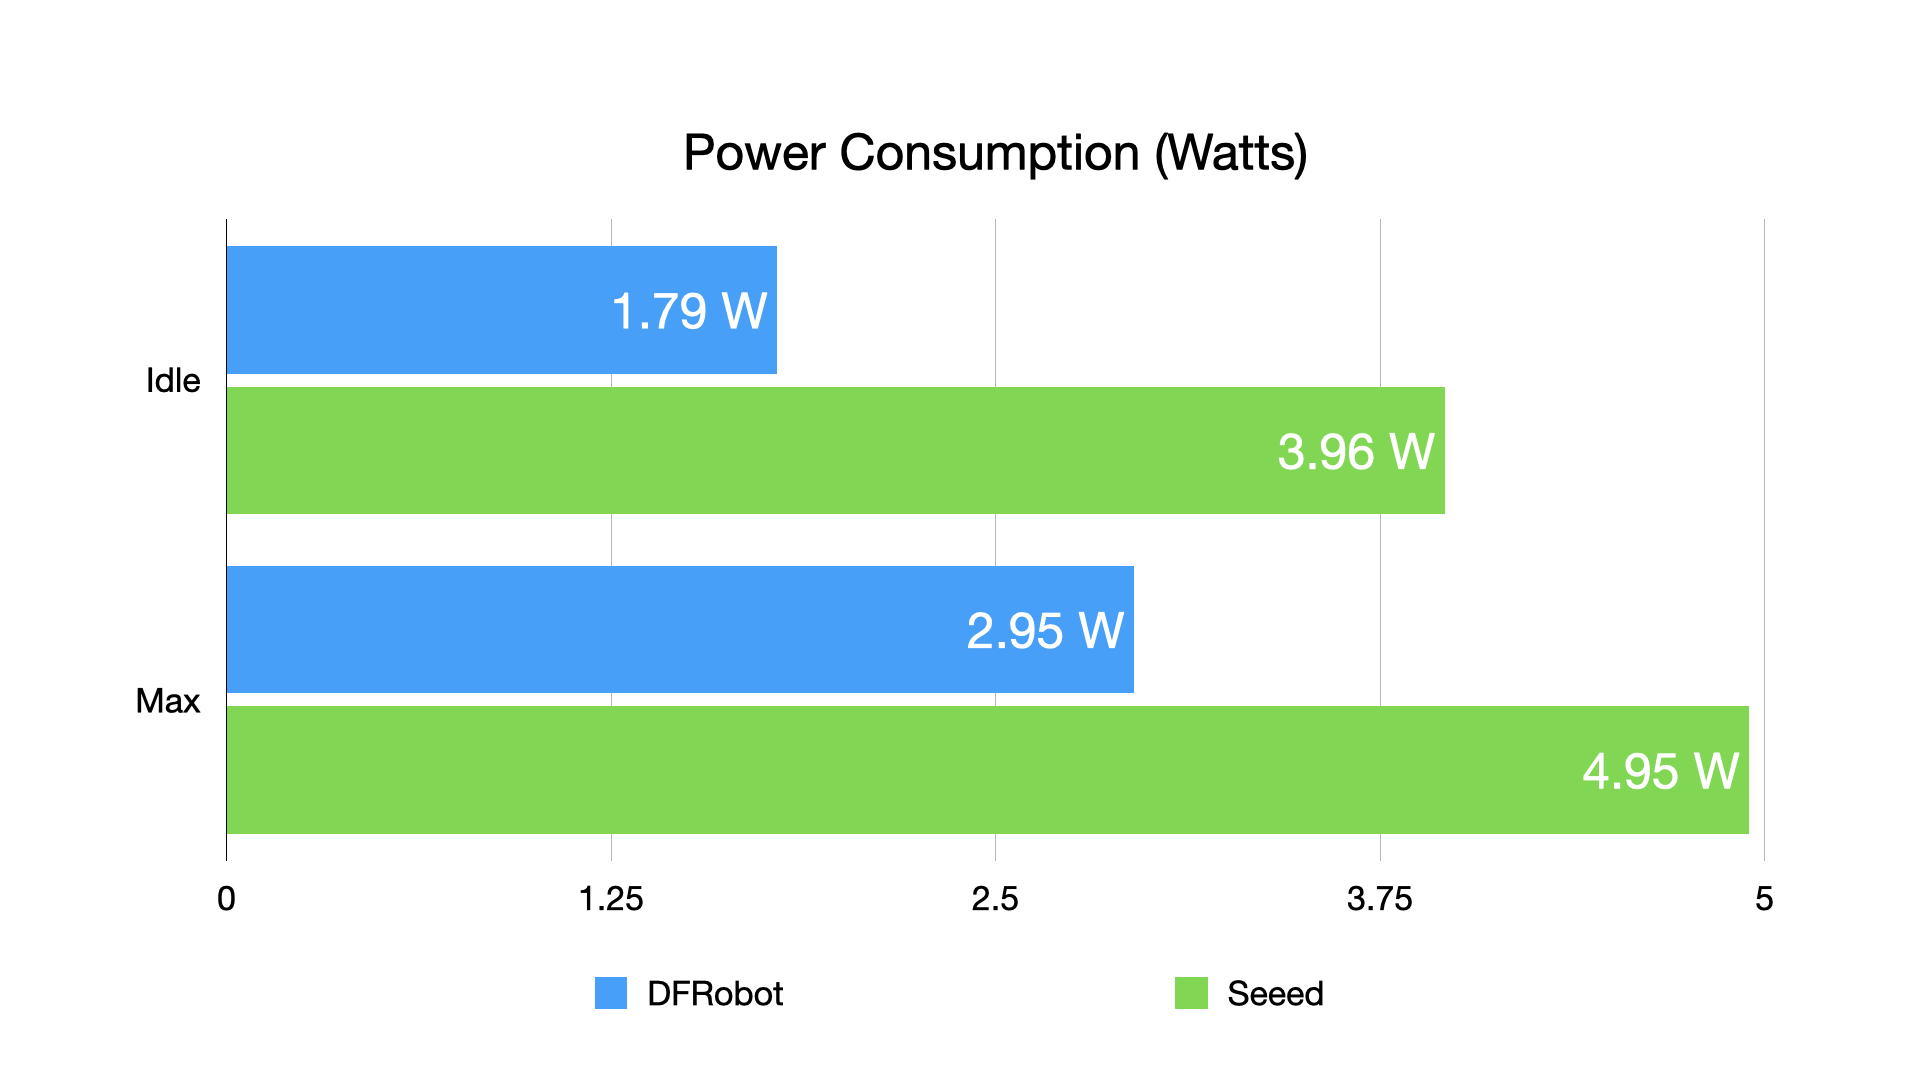 Power consumption of Seeed and DFRobot CM4 router boards